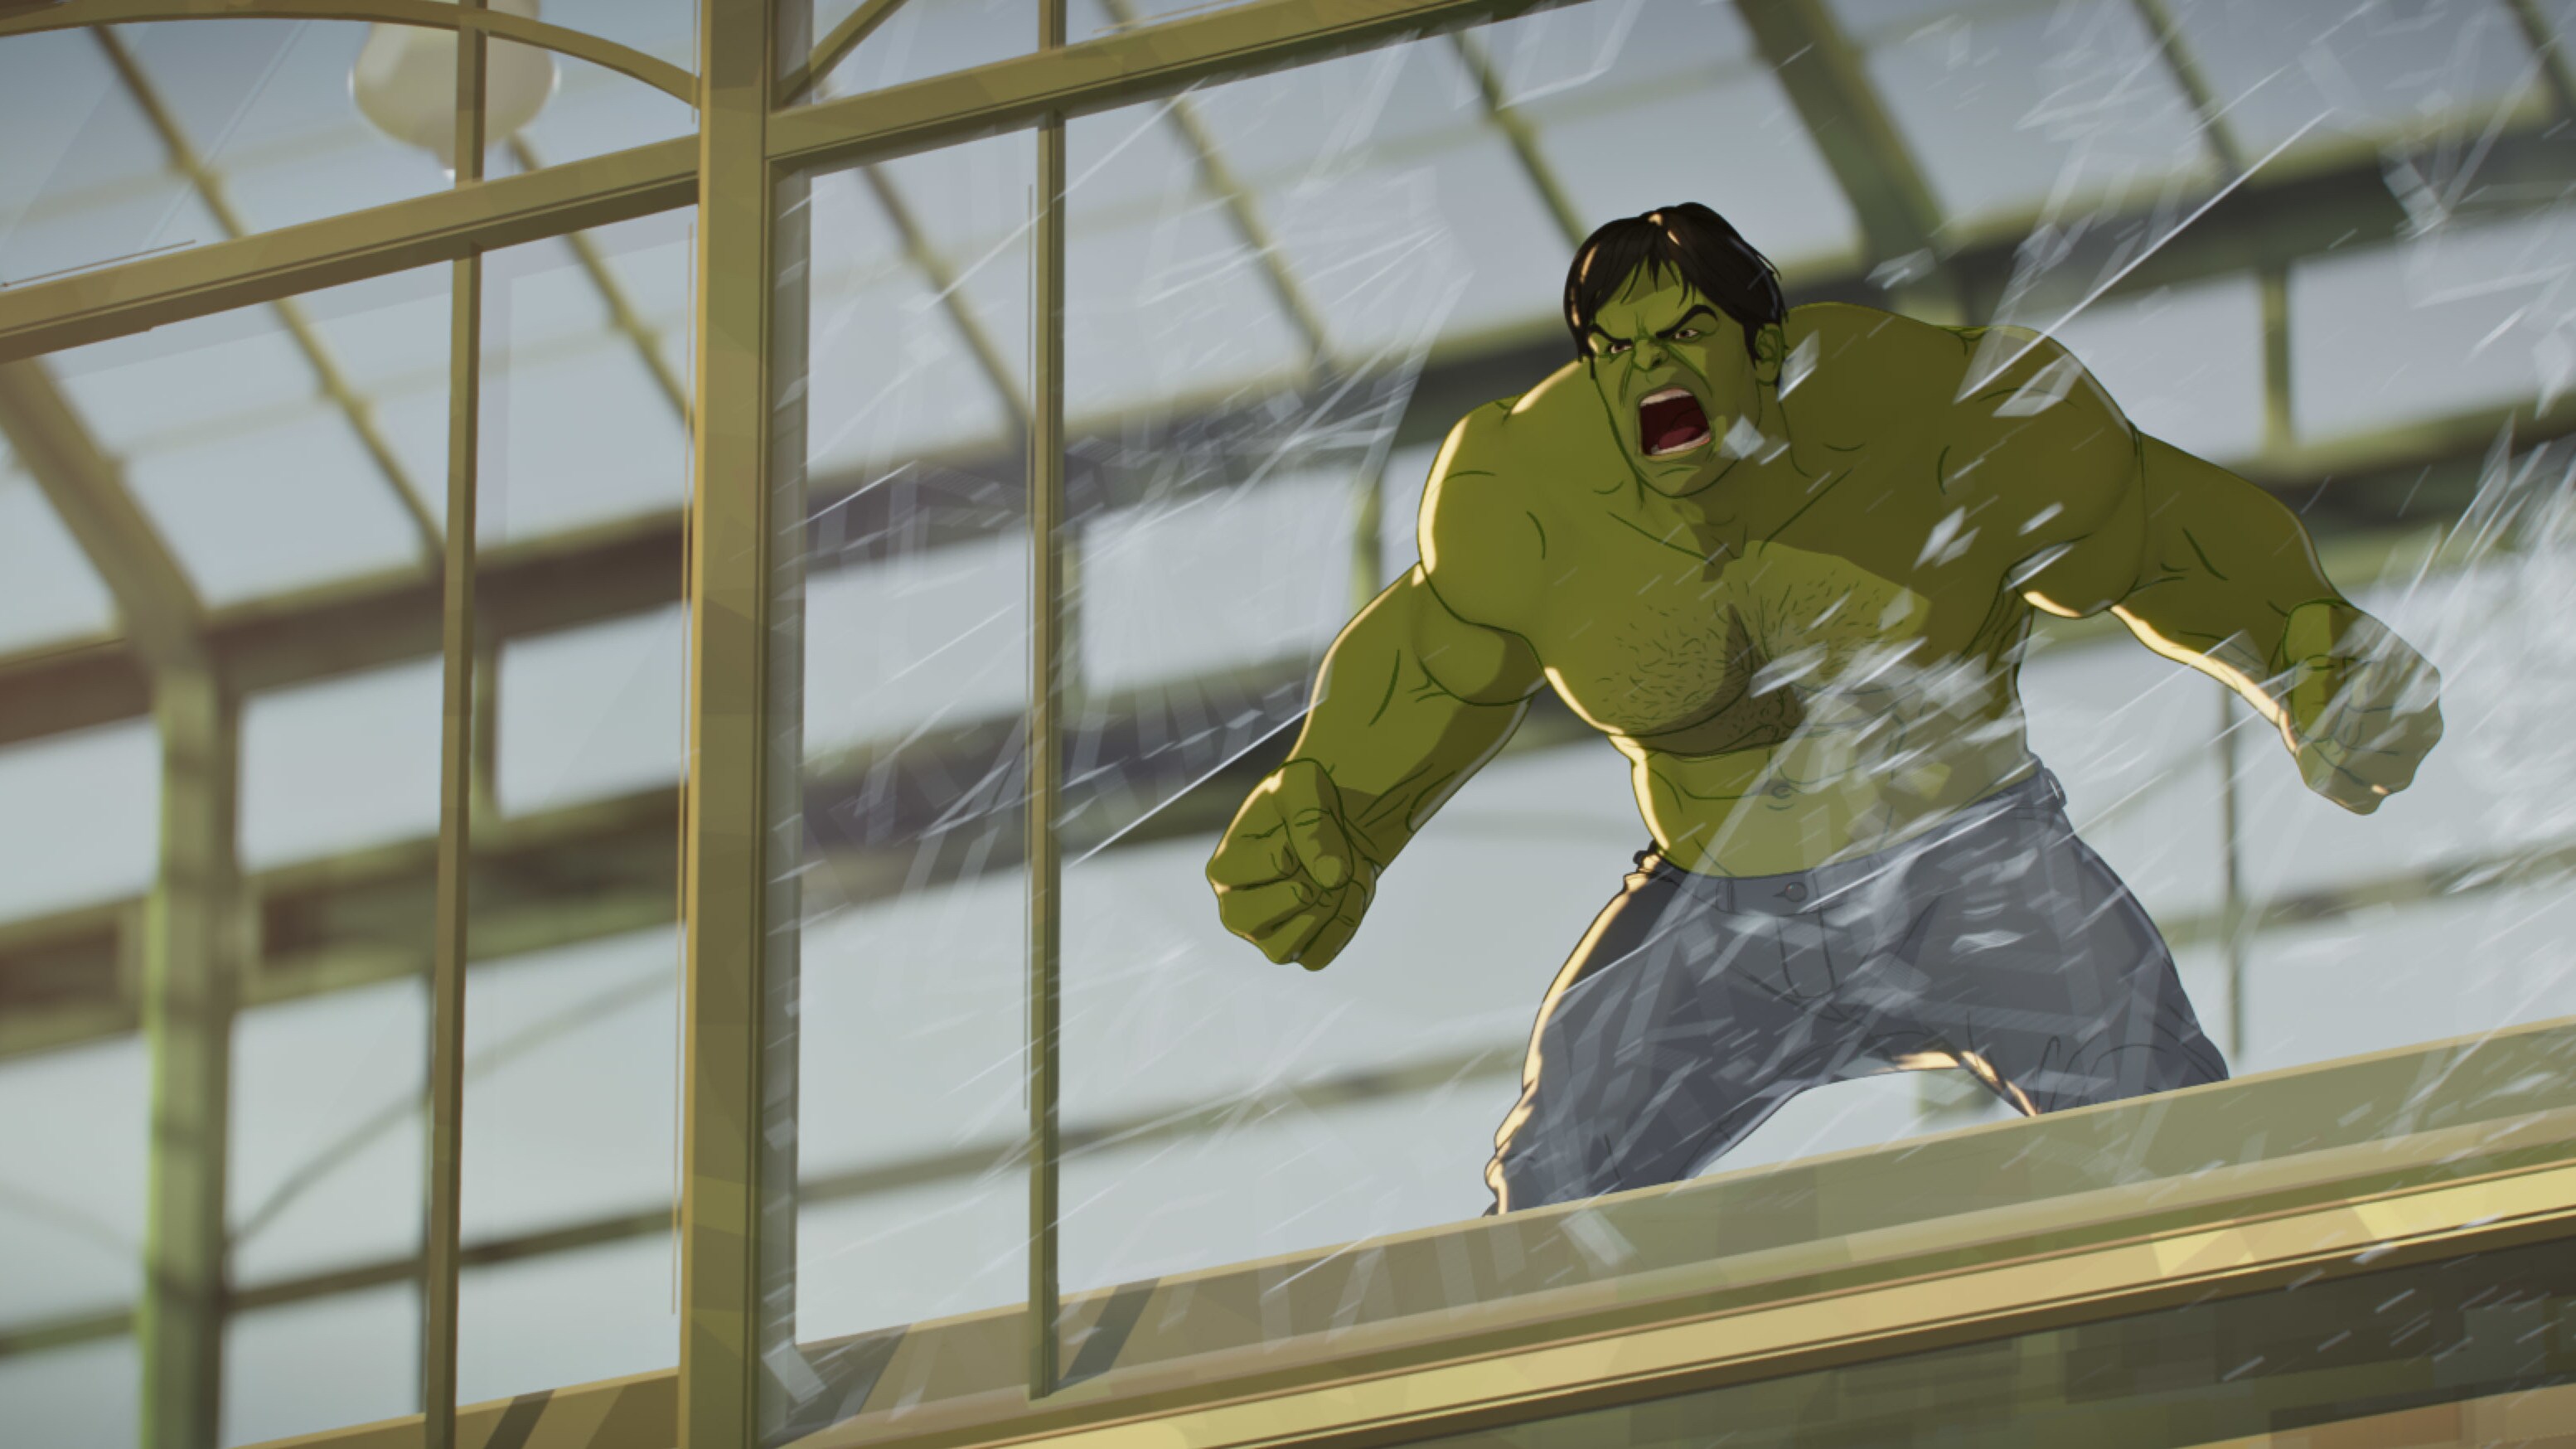 Hulk/Bruce Banner in Marvel Studios' WHAT IF…? exclusively on Disney+. ©Marvel Studios 2021. All Rights Reserved.